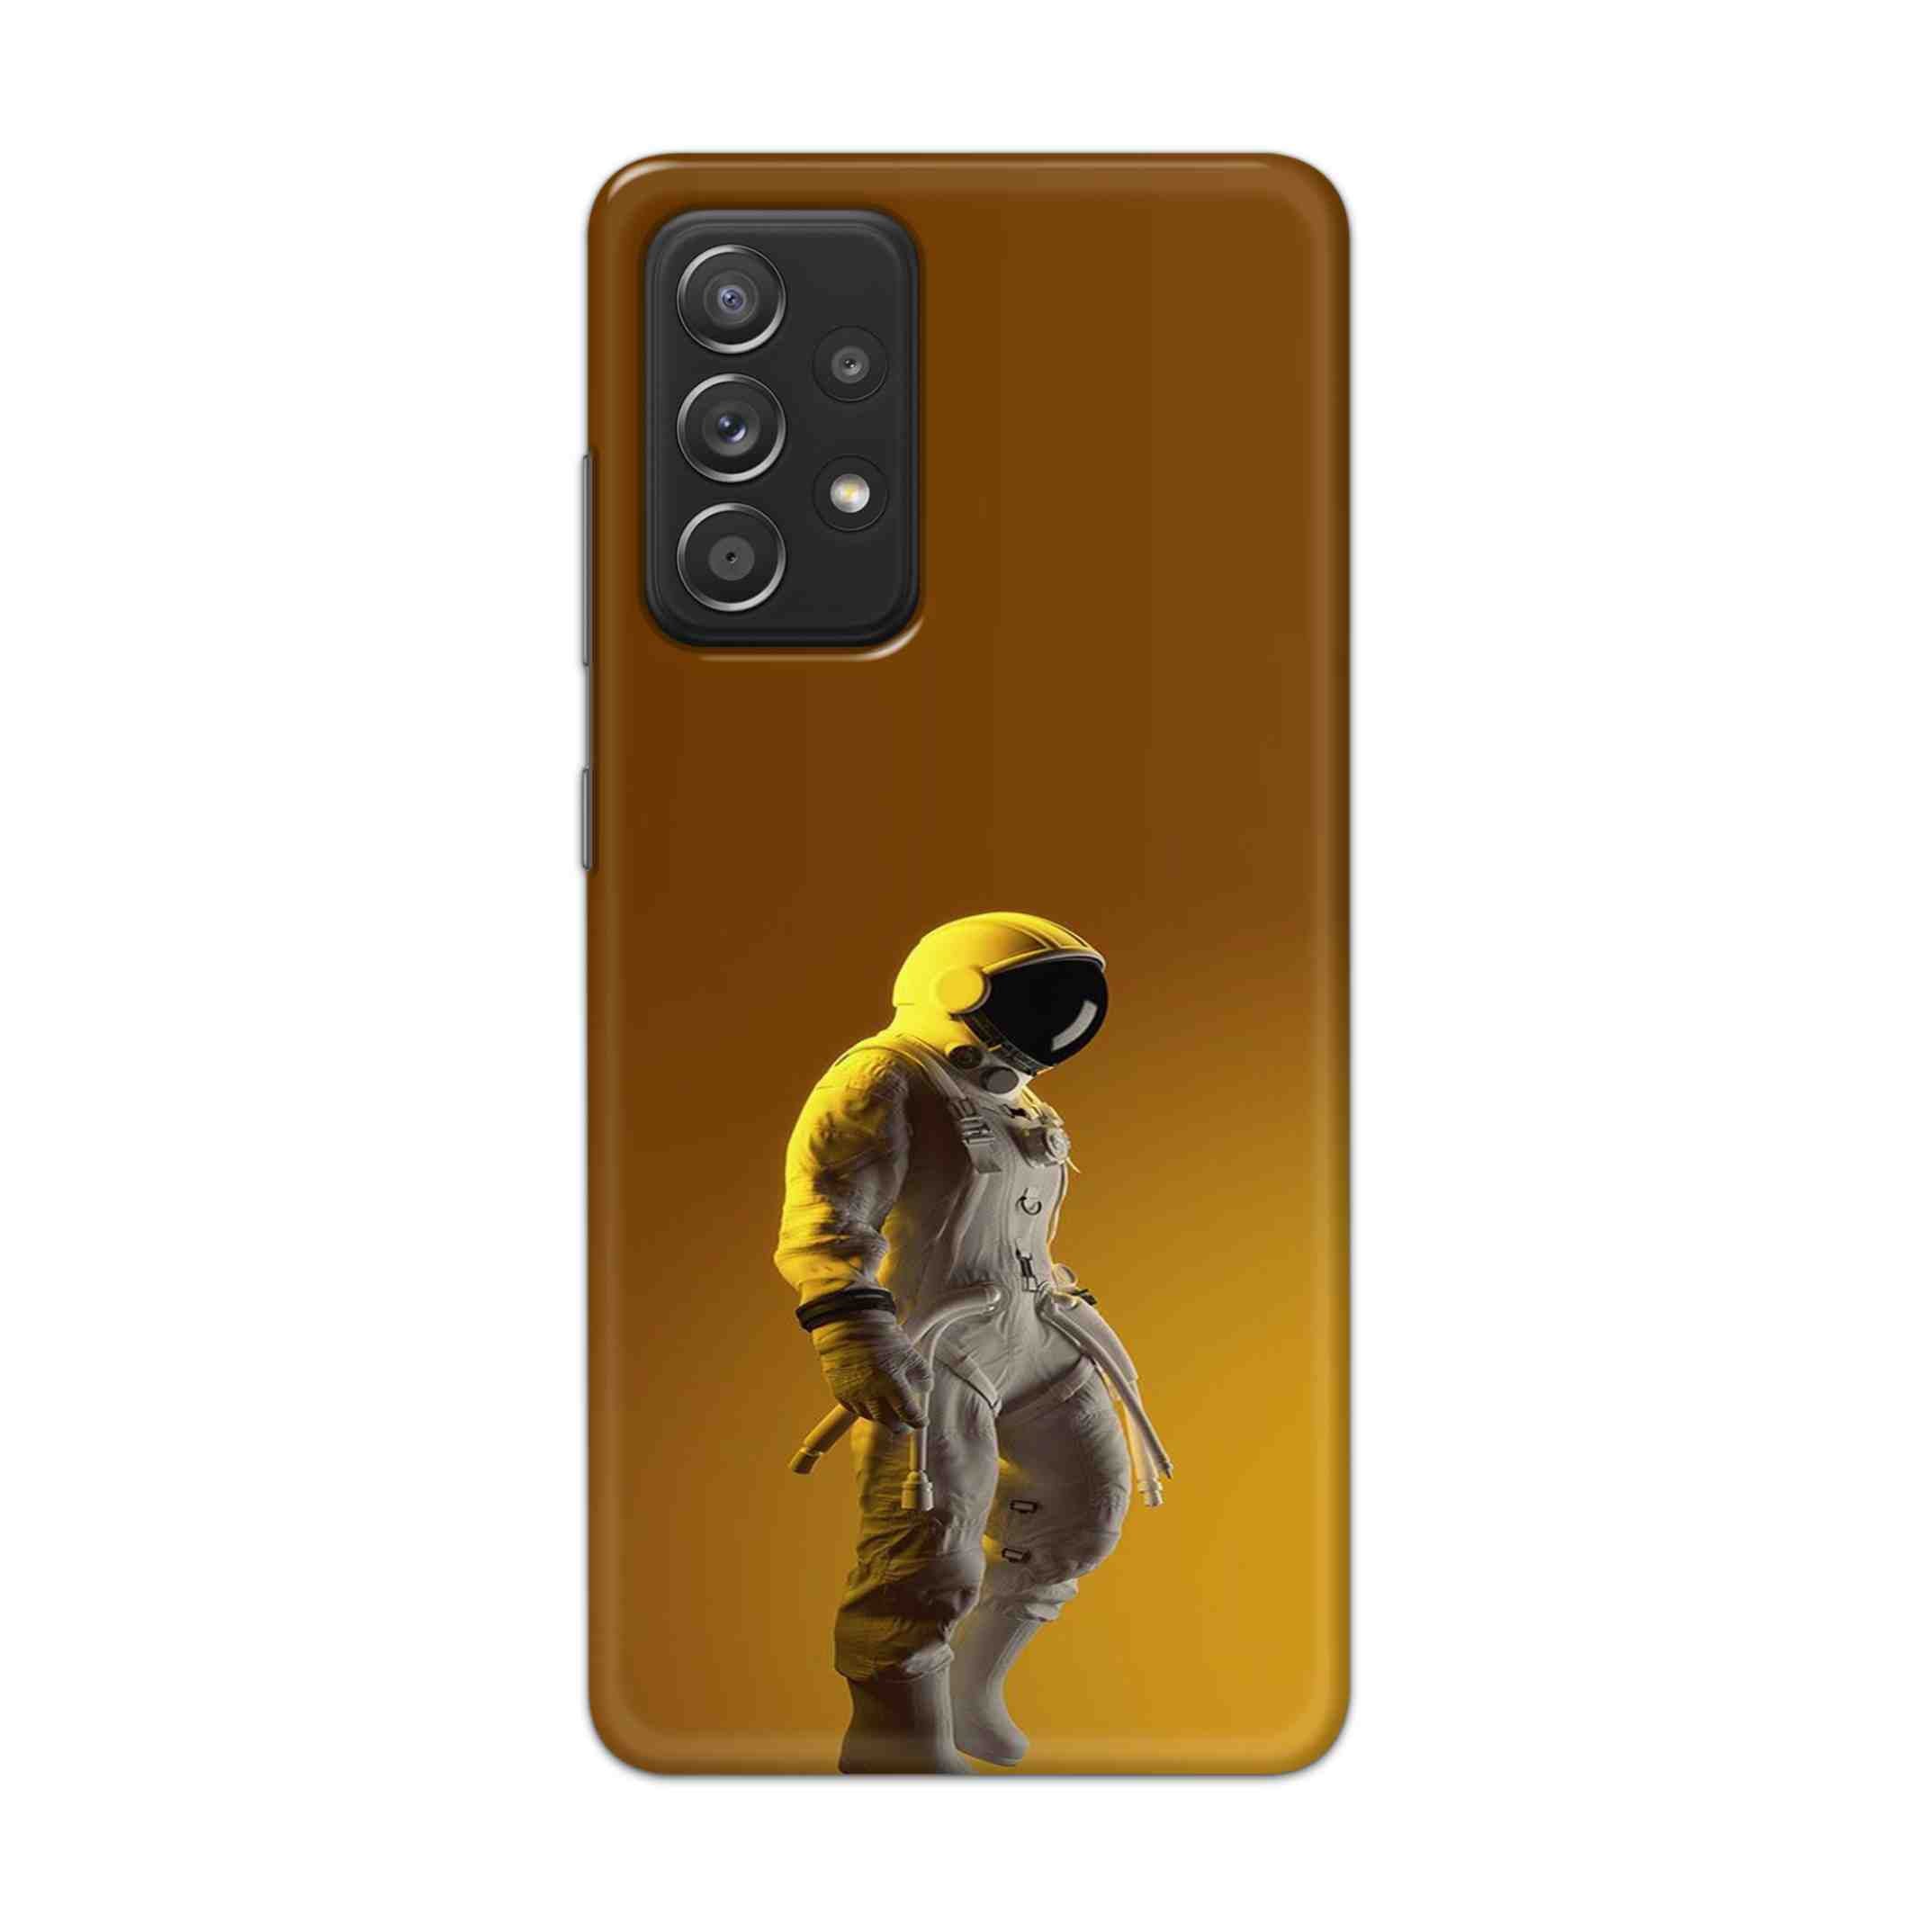 Buy Yellow Astronaut Hard Back Mobile Phone Case Cover For Samsung Galaxy A52 Online